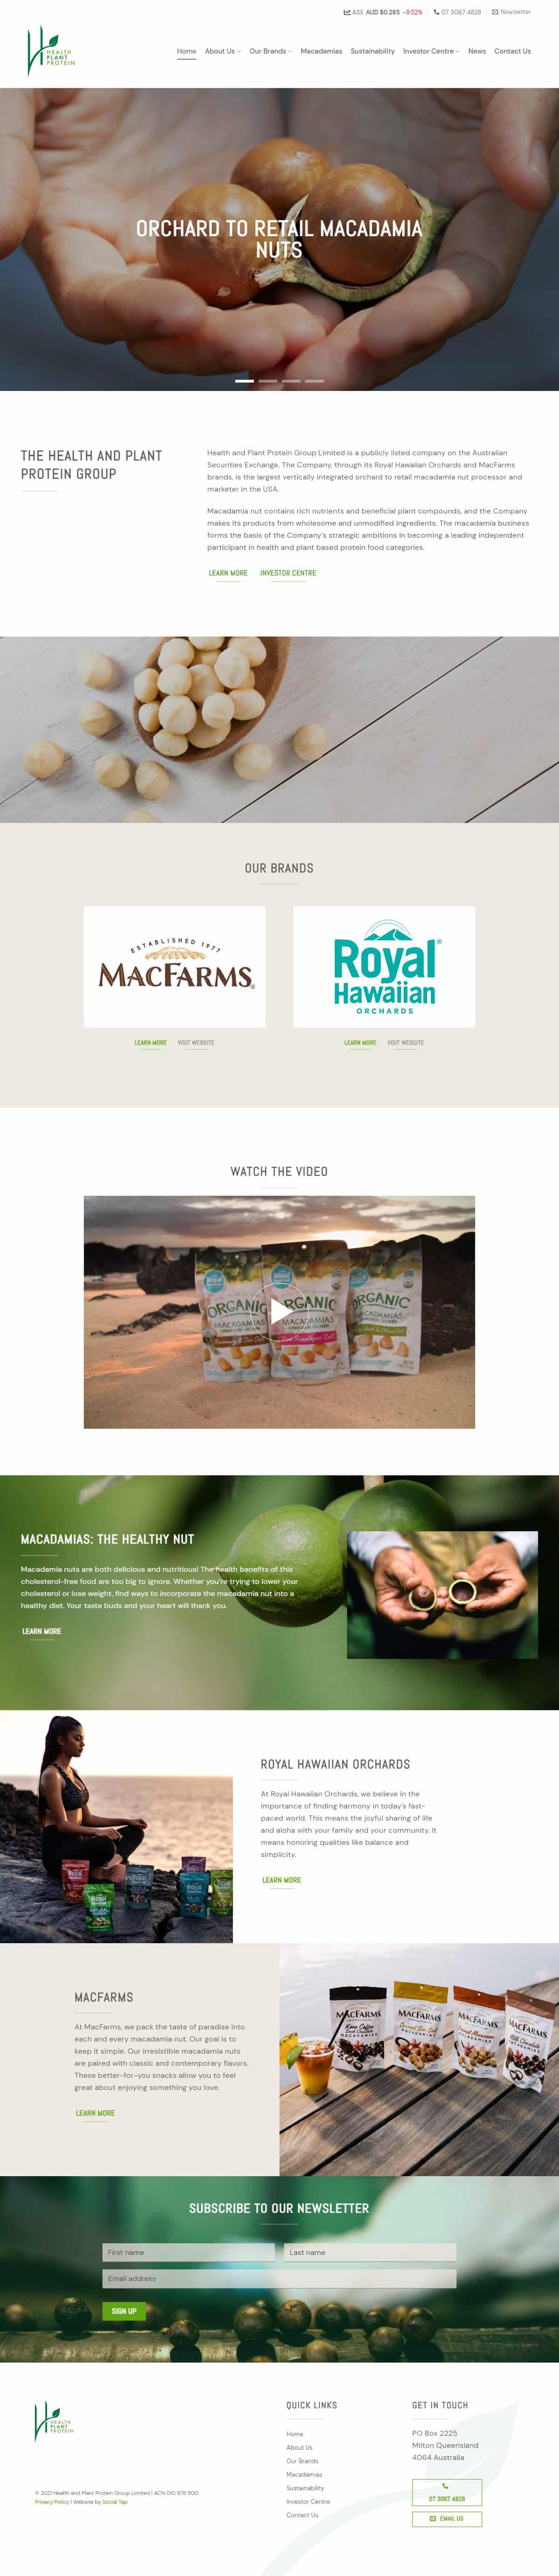 Hospitality Tourism Website Design Health And Plant Protein Group Limited